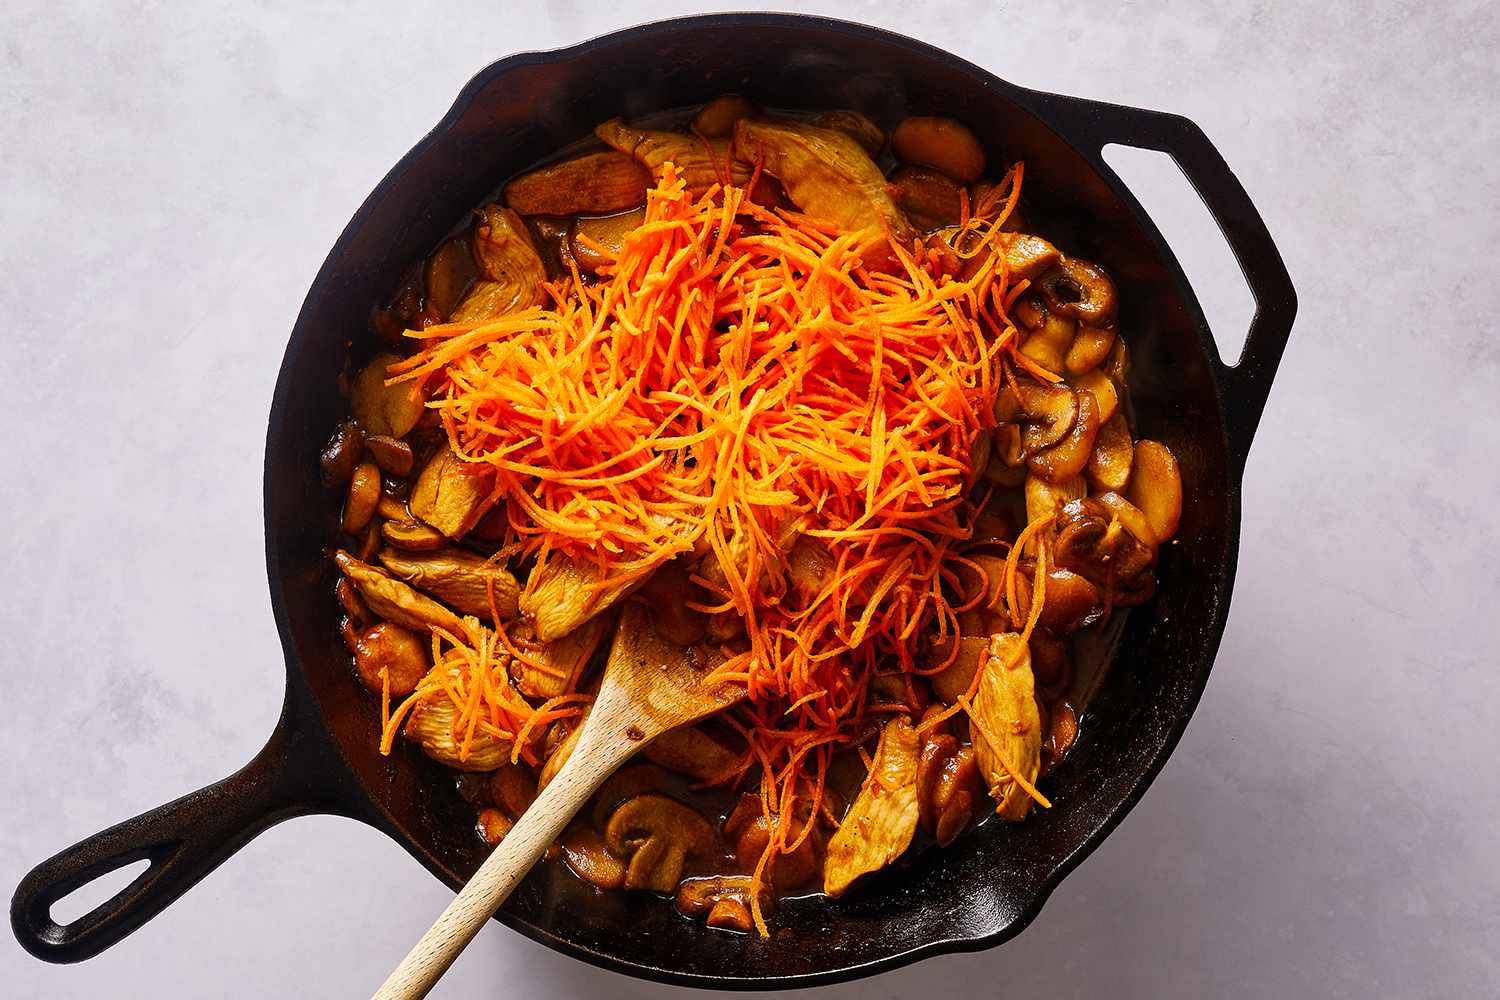 Chicken, shredded carrots, mushrooms and sauce in a cast iron skillet, with a wooden spoon 